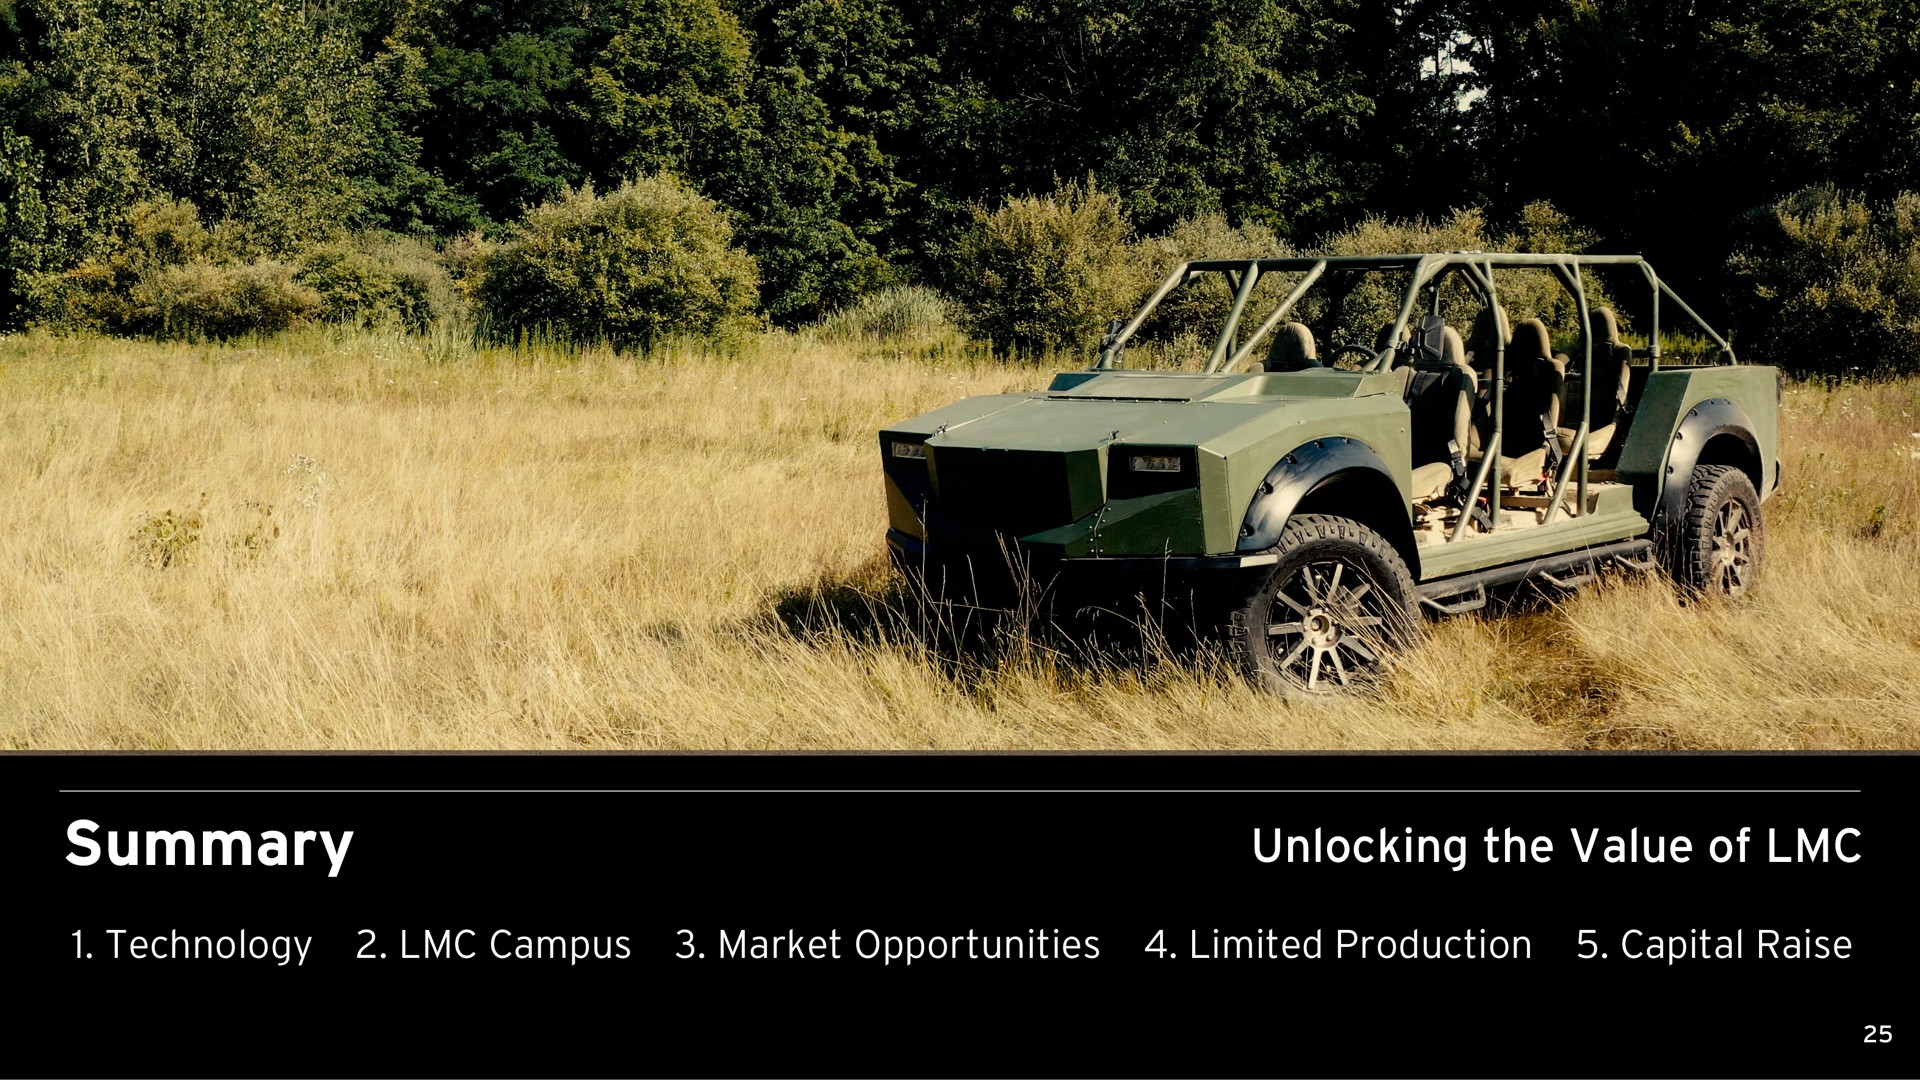 summary unlocking the value of technology campus market opportunities limited production capital raise tan nat a | Lordstown Motors